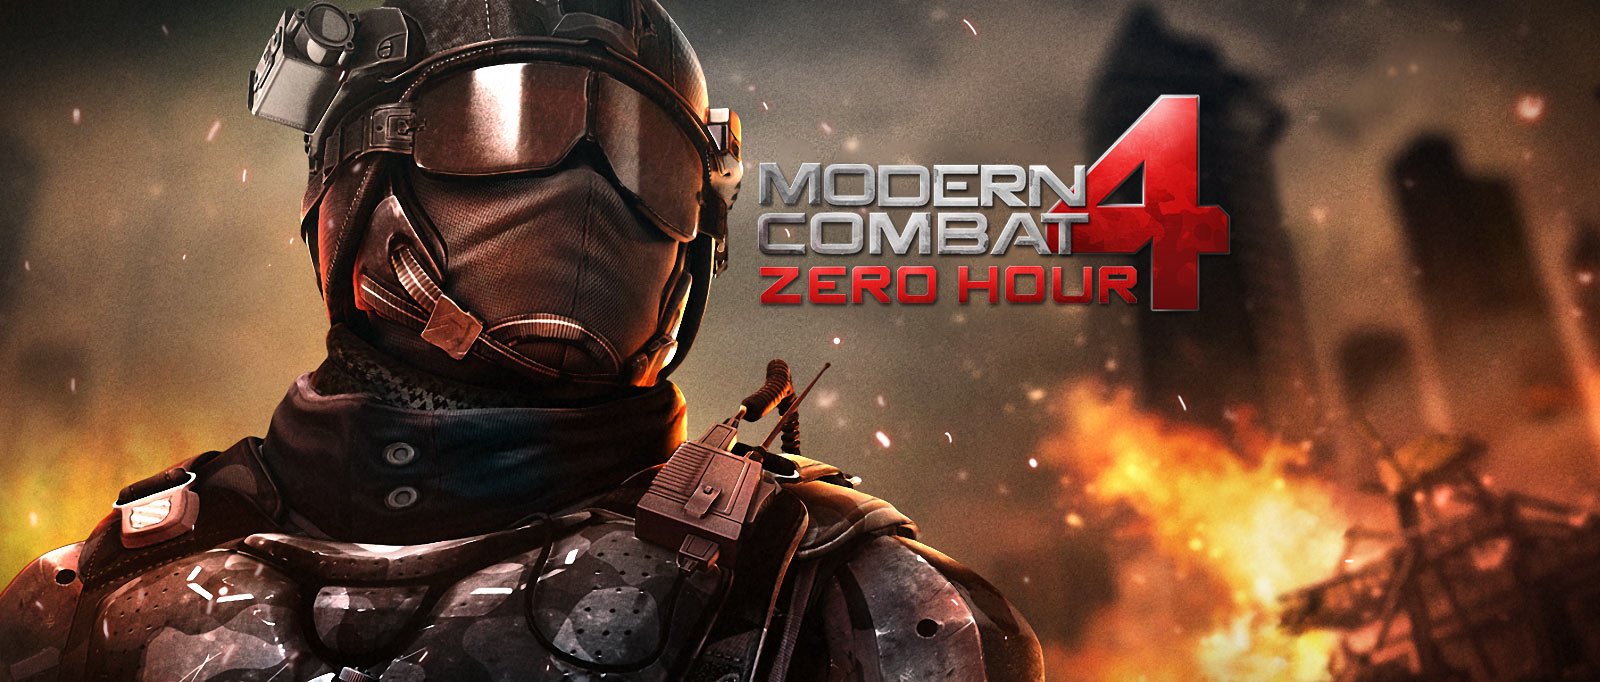 Download Modern Combat 4 Apk For Android 6.0.1